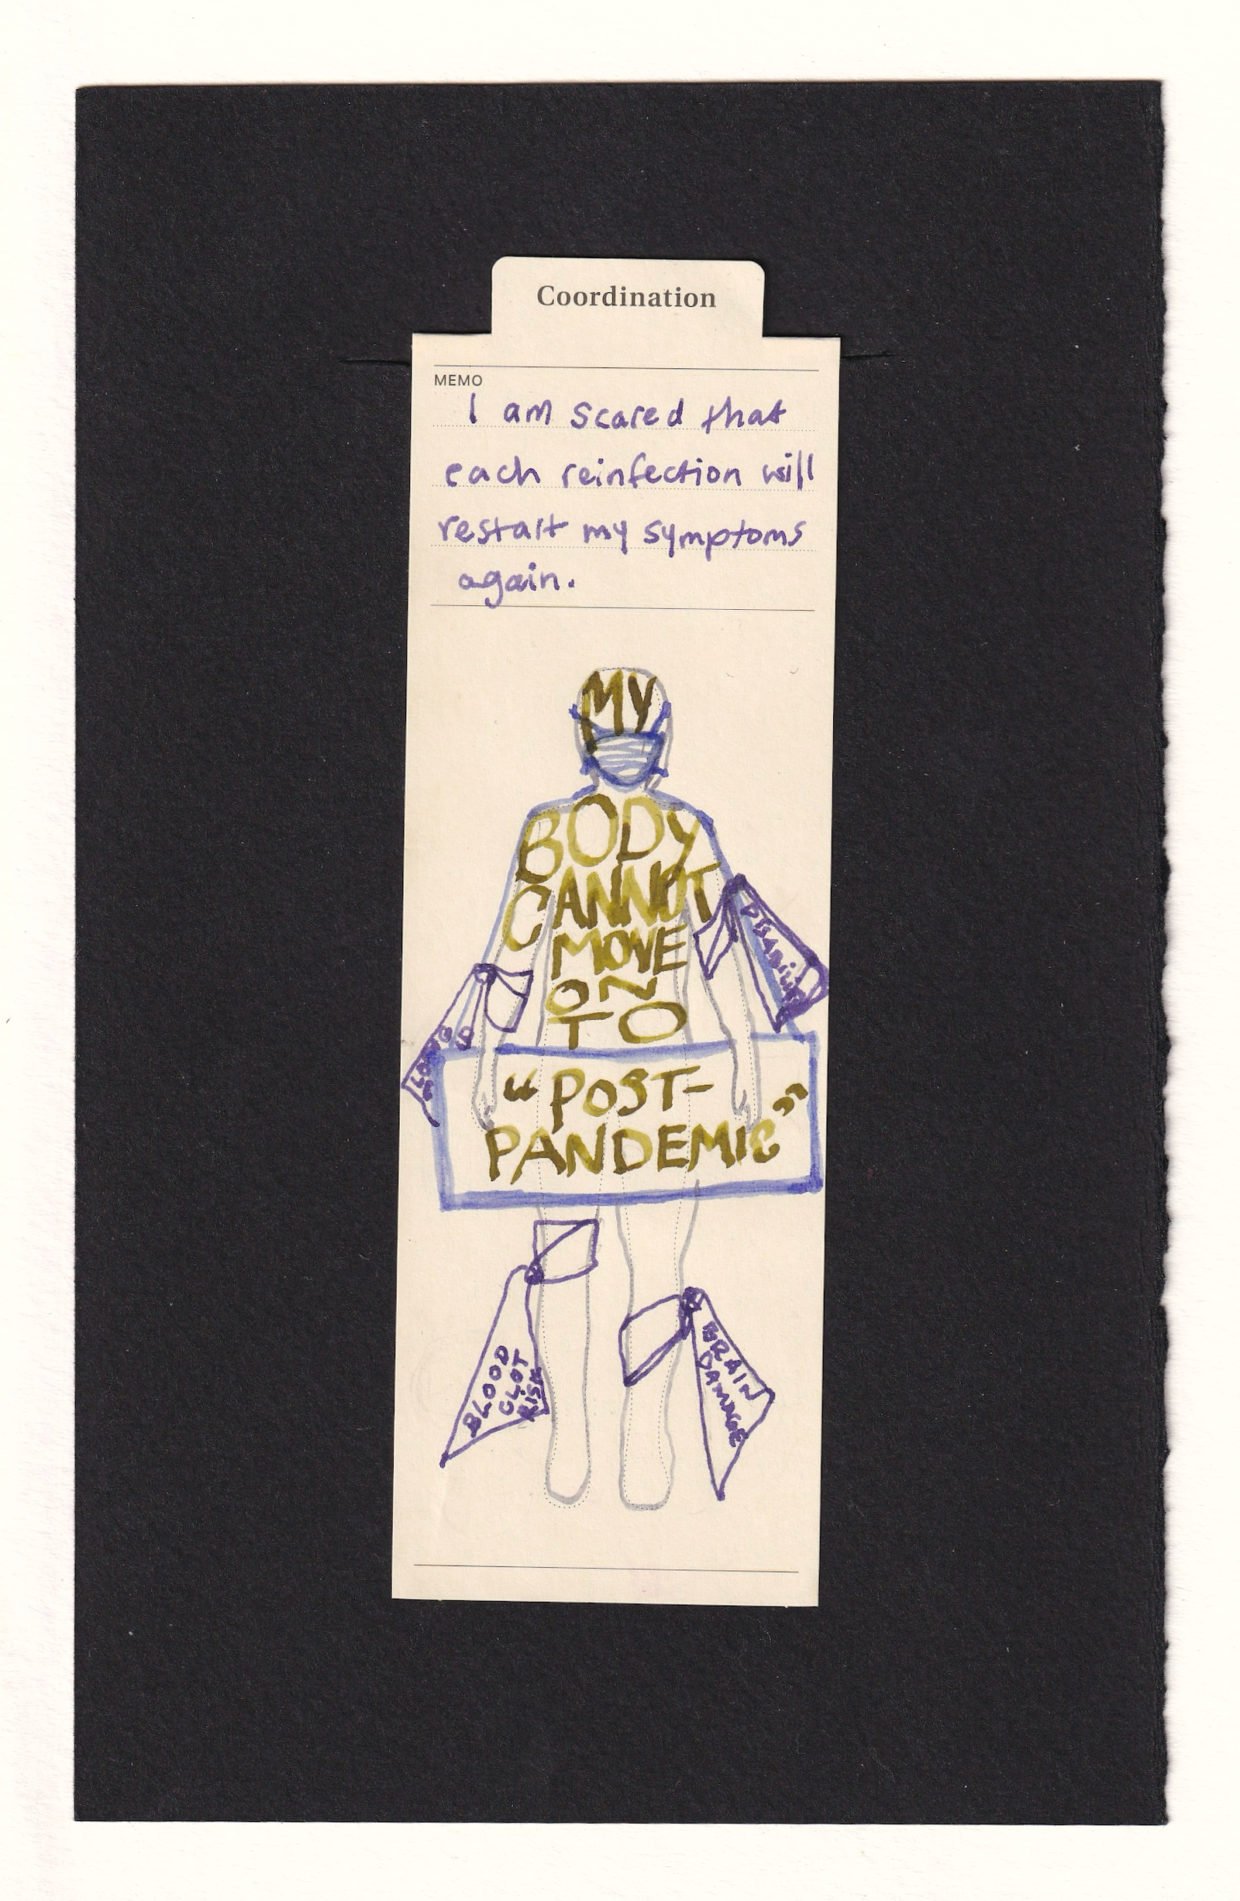 Figure printed on a manila bookmark. The head and upper body are inscribed with in caps, "My Body Cannot Move on to" and a sign slung over their neck reads "'Post-Pandemic'" in quotes. The face is wearing a respirator face mask, and the arms and legs are tied with bandages with text hanging off of the ties, reading things like "Blood Clot Risk," "Brain Damage," "Disability" and partially obscured "Long Covid."